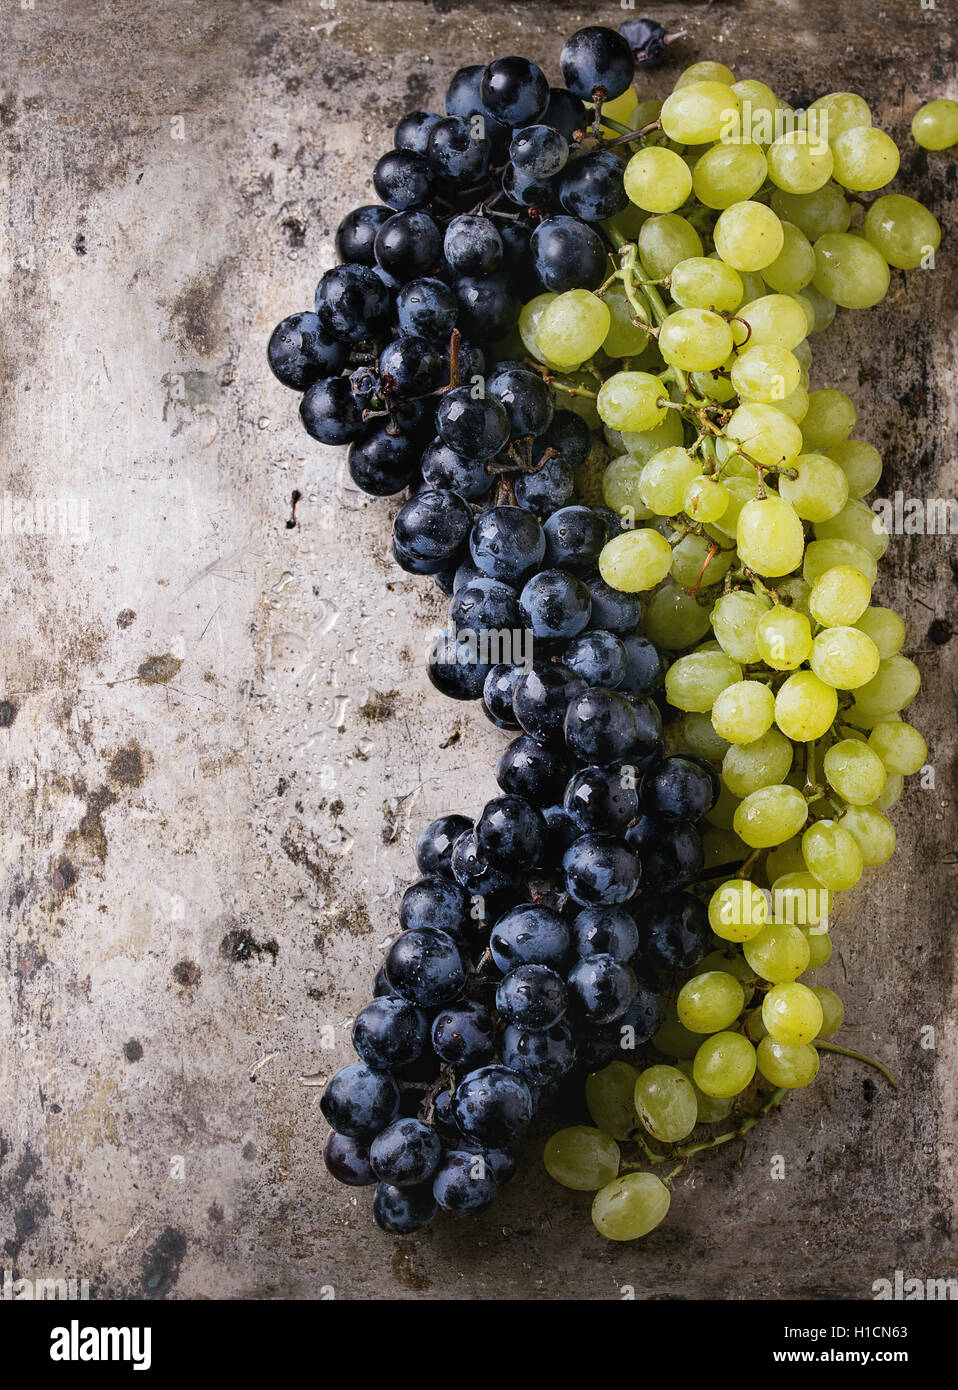 Bunches of red and white grapes Stock Photo